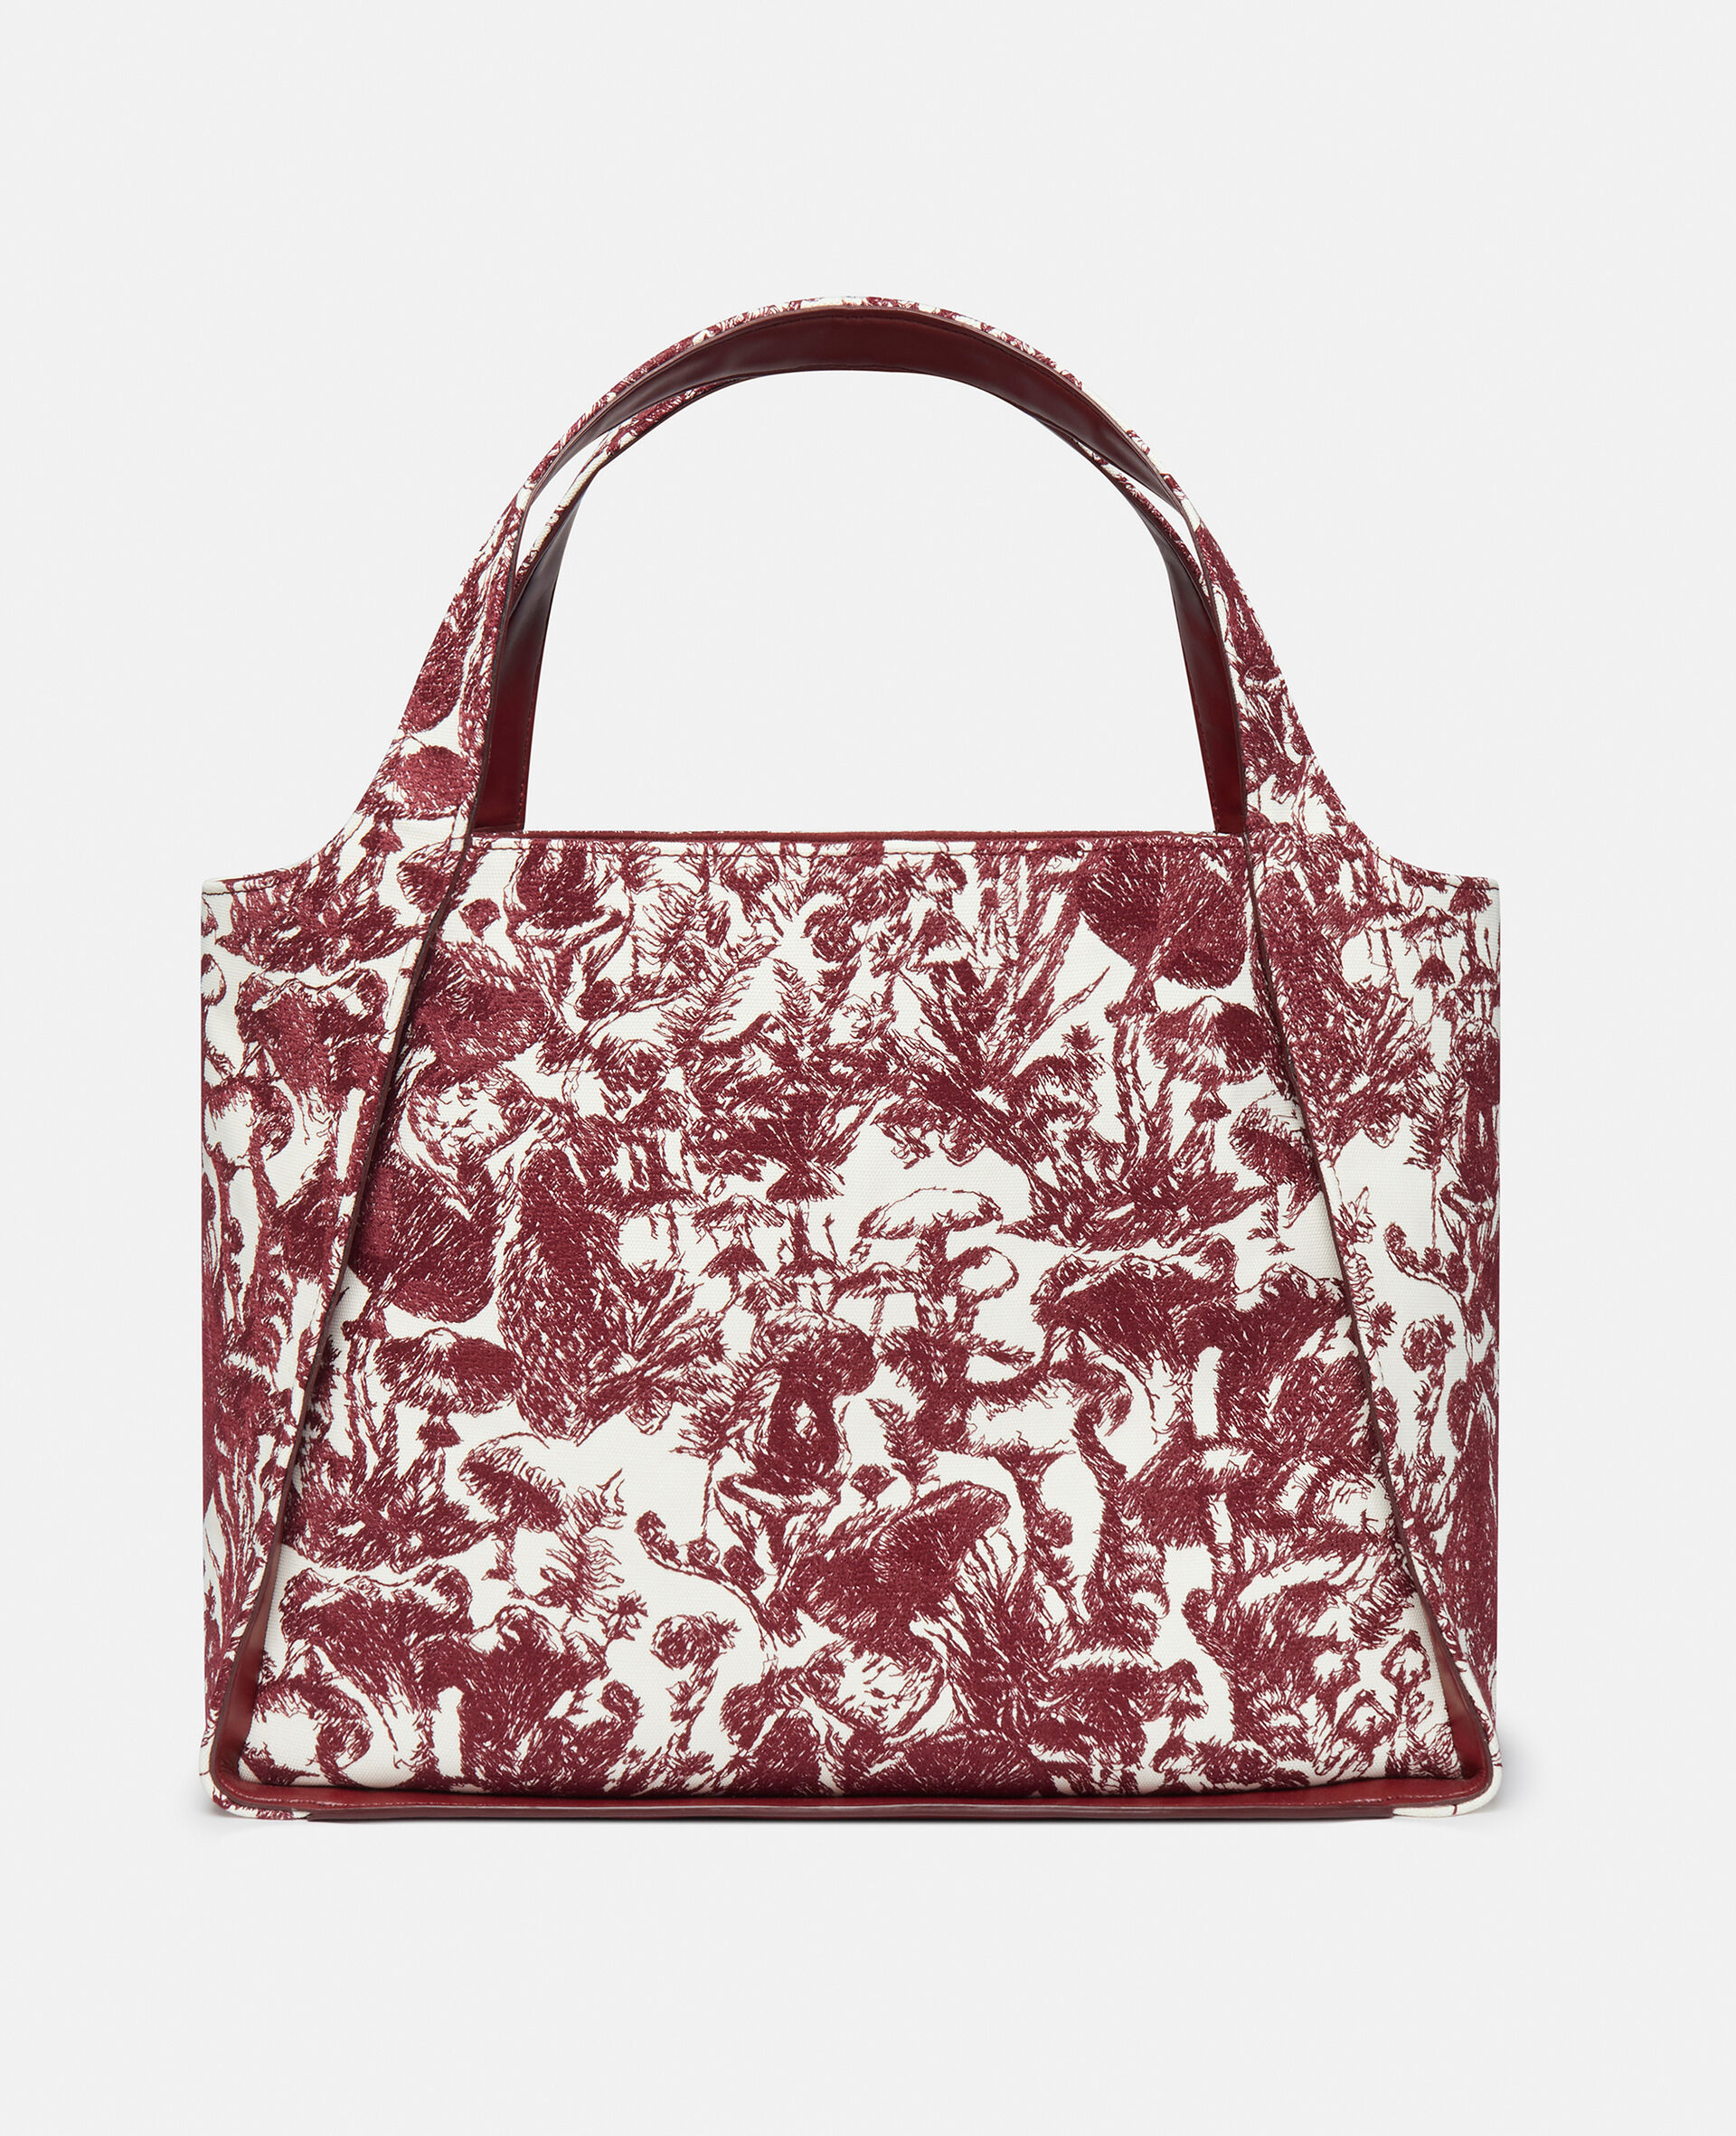 All Over Print Shoulder Tote Bag Double Handle With Coin Purse